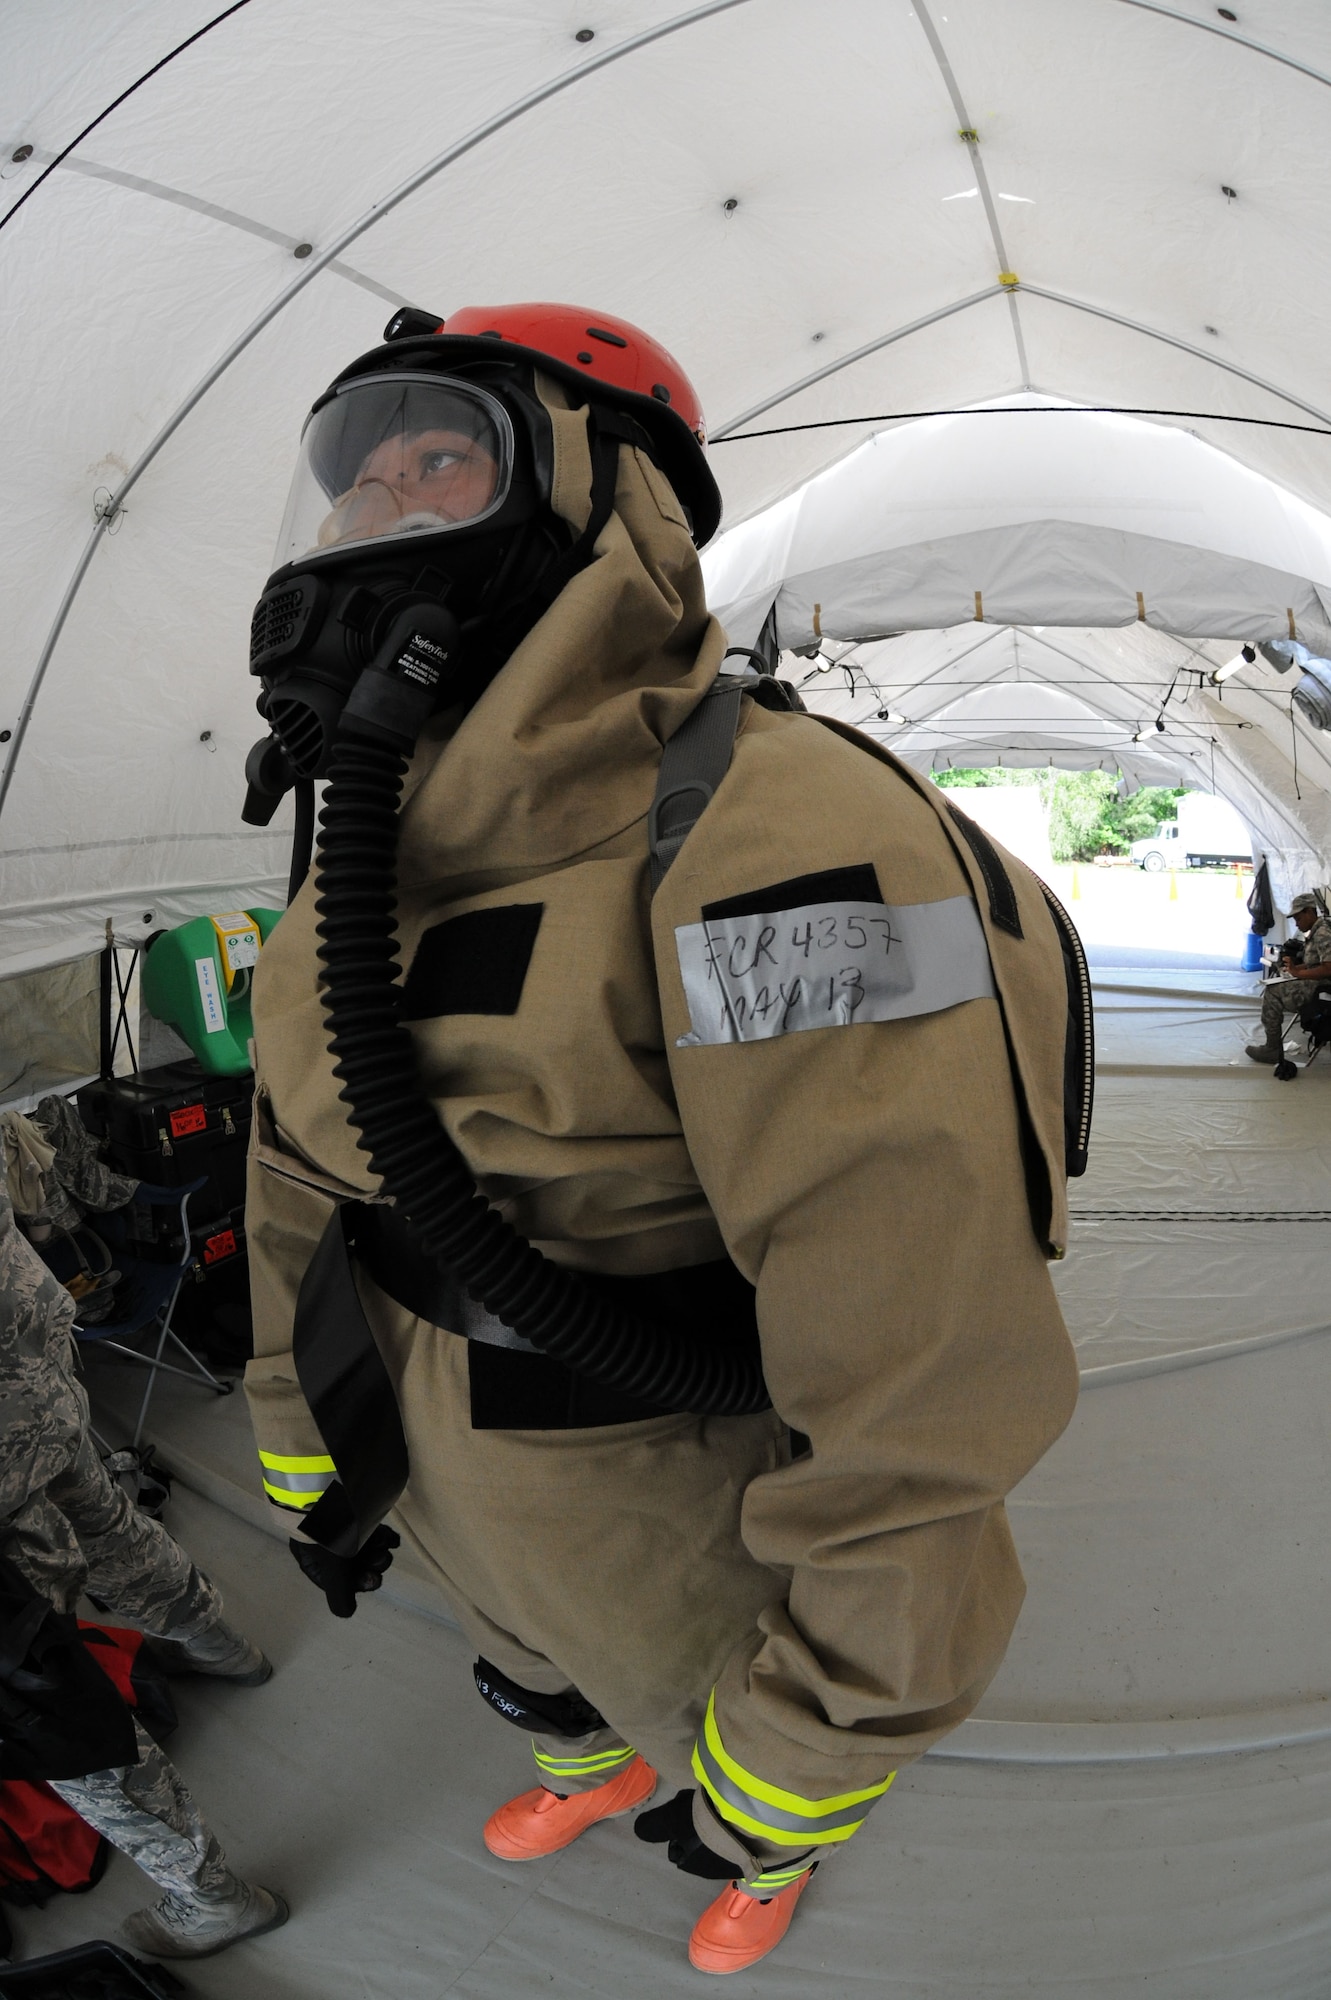 Tech. Sgt. Chito Reyes, 113th services flight, D.C. Air National Guard, suits up during Chemical Biological Radiological Nuclear (CBRN) Emergency Response Force Package training, May 14, 2015 in Virginia Beach, Va. Reyes is part of the 113th wing Fatality Search and Recovery Team.  (U.S. Air National Guard photo by Airman 1st Class Anthony Small)